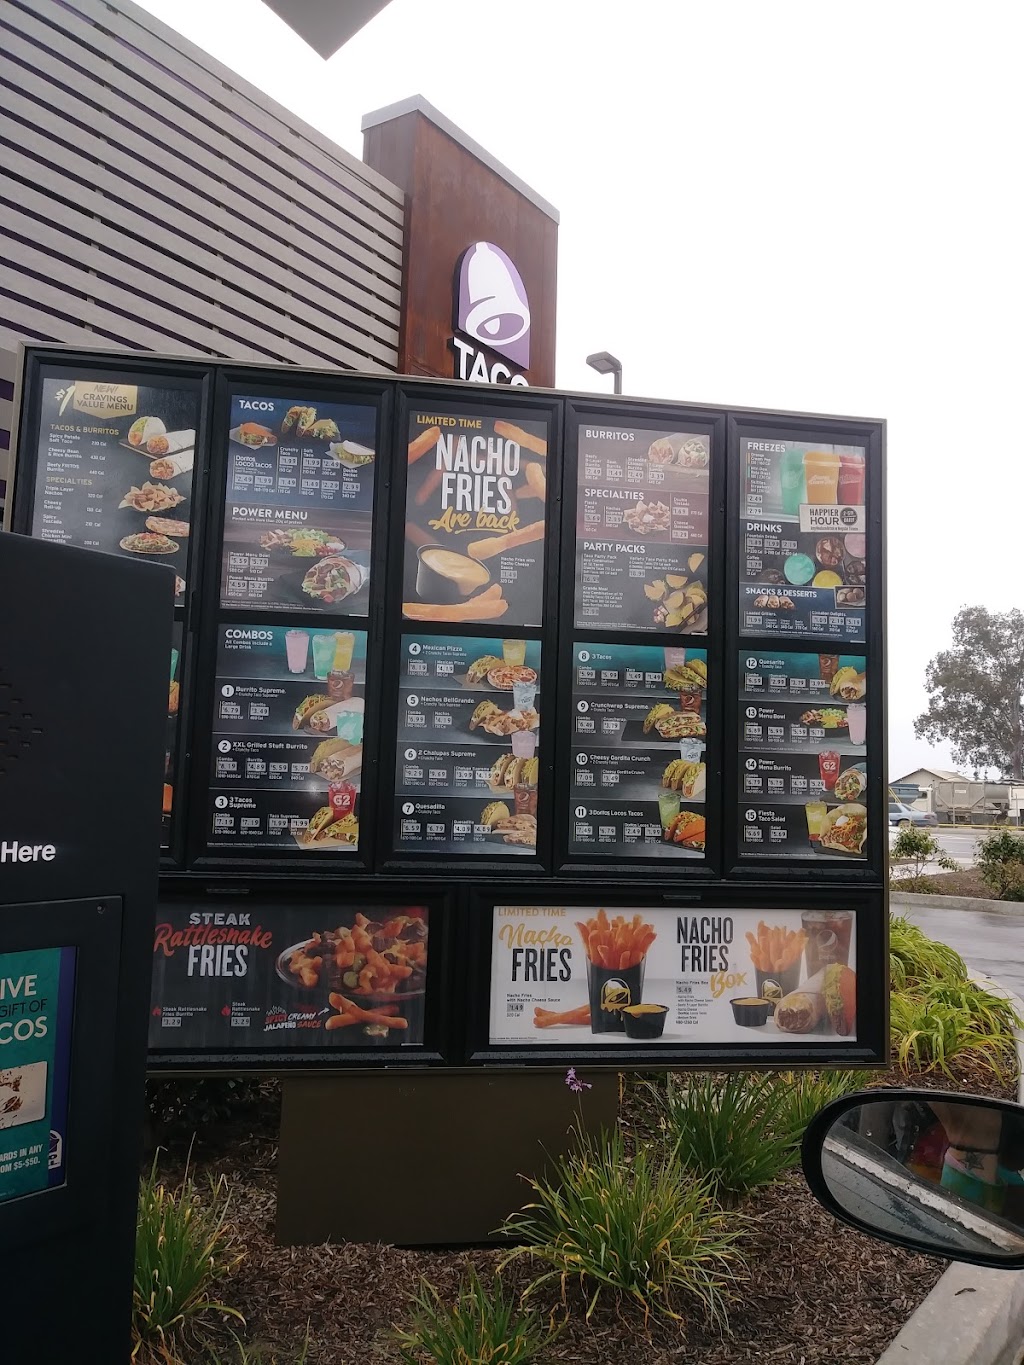 Taco Bell | 2417 E Lacey Blvd, Hanford, CA 93230 | Phone: (559) 582-2763